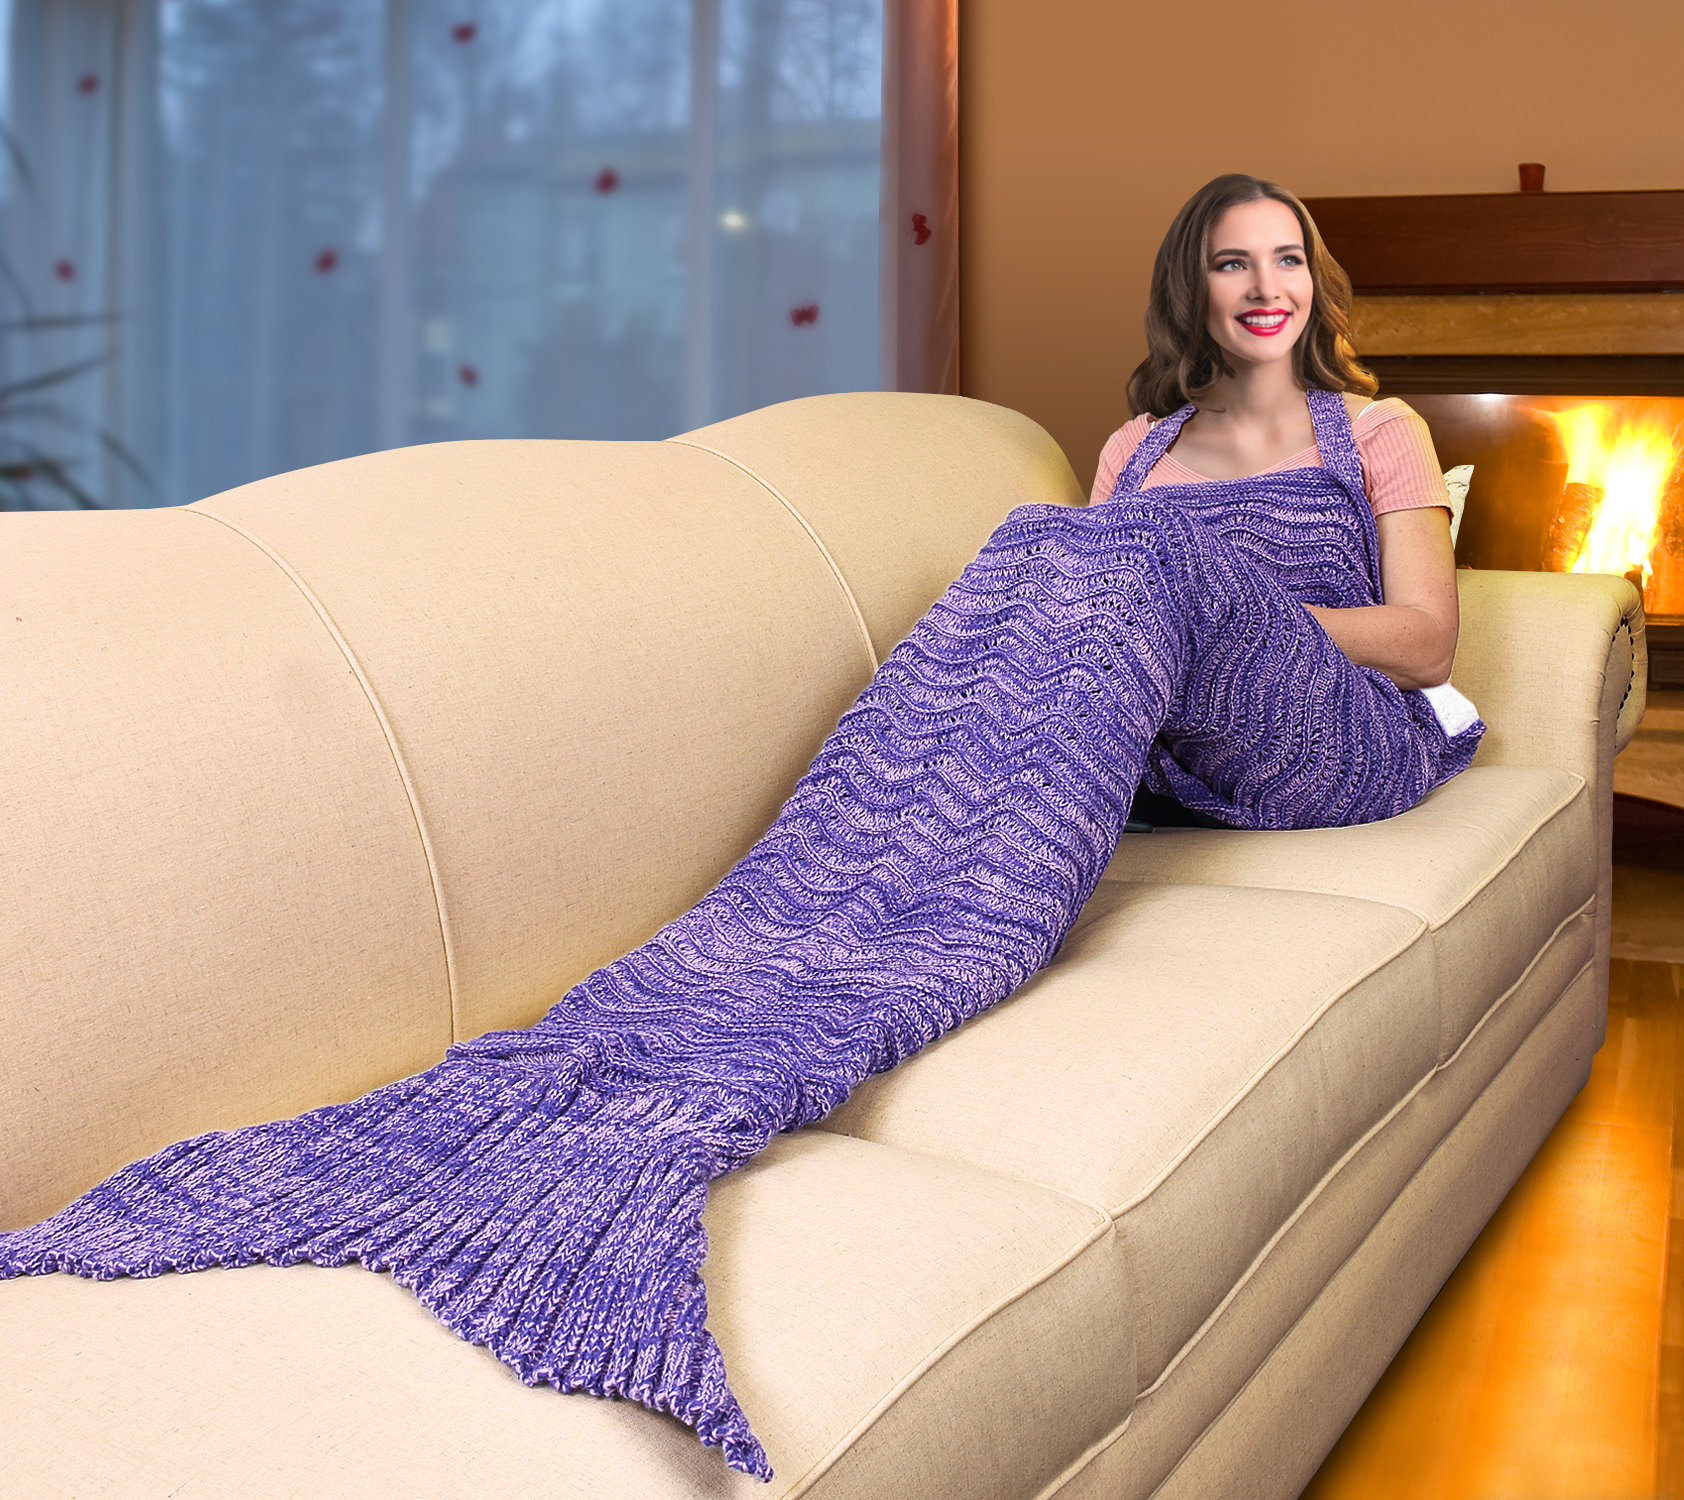 Catalonia Mermaid Tail Sherpa Blanket, Super Soft Warm Comfy Sherpa Lined  Crochet Mermaids with Non-slip Neck Strap